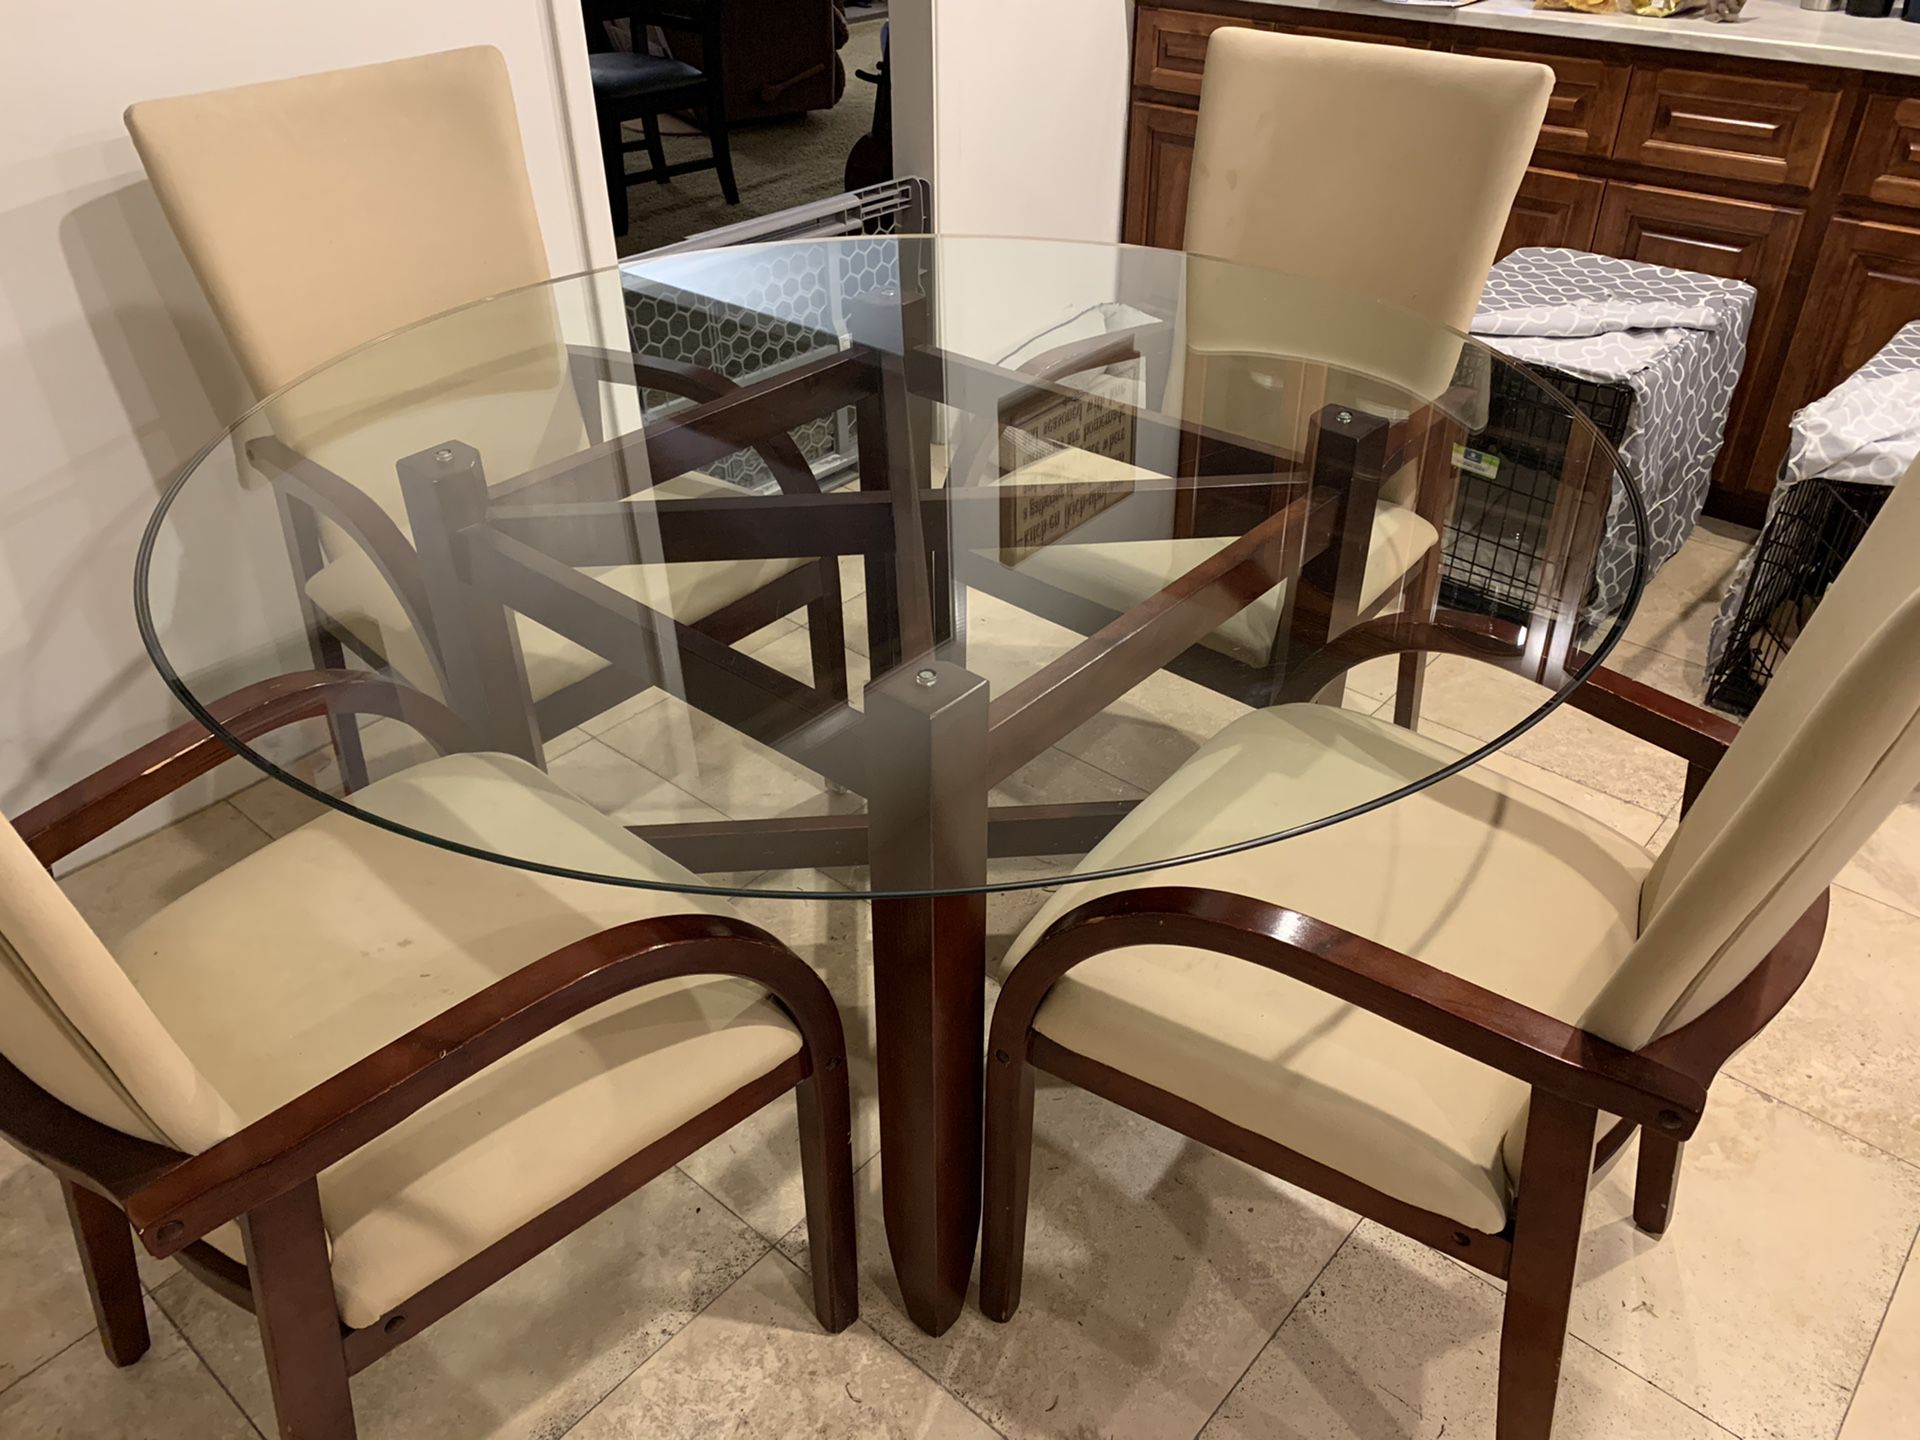 Glass Kitchen table with chairs!